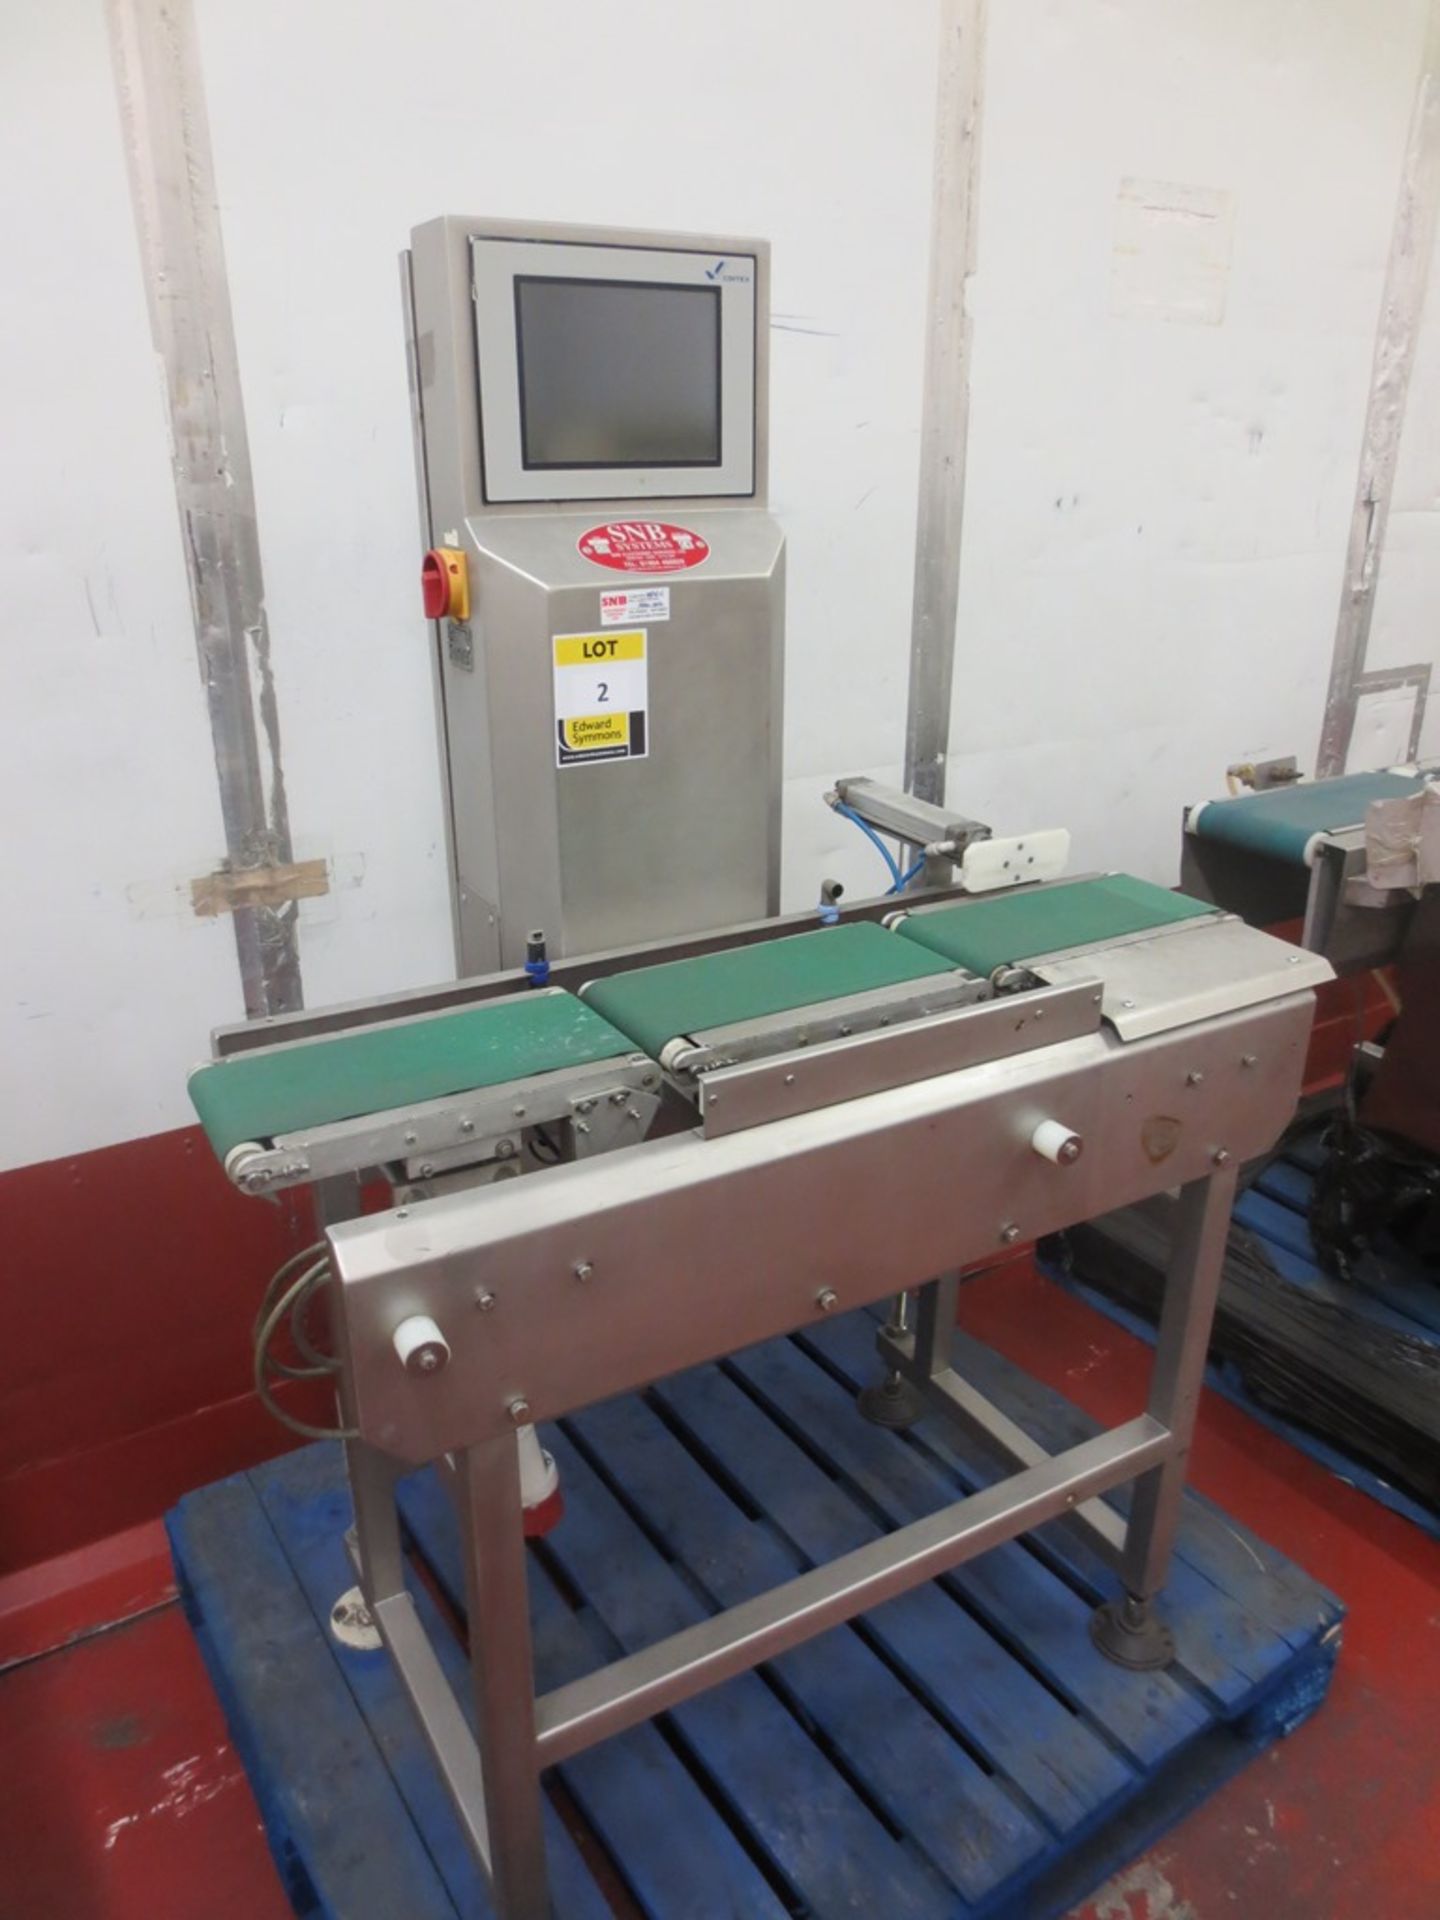 SNB Systems type CS2000 digital checkweigher with cintex digital control, Serial No 78950. Fitted